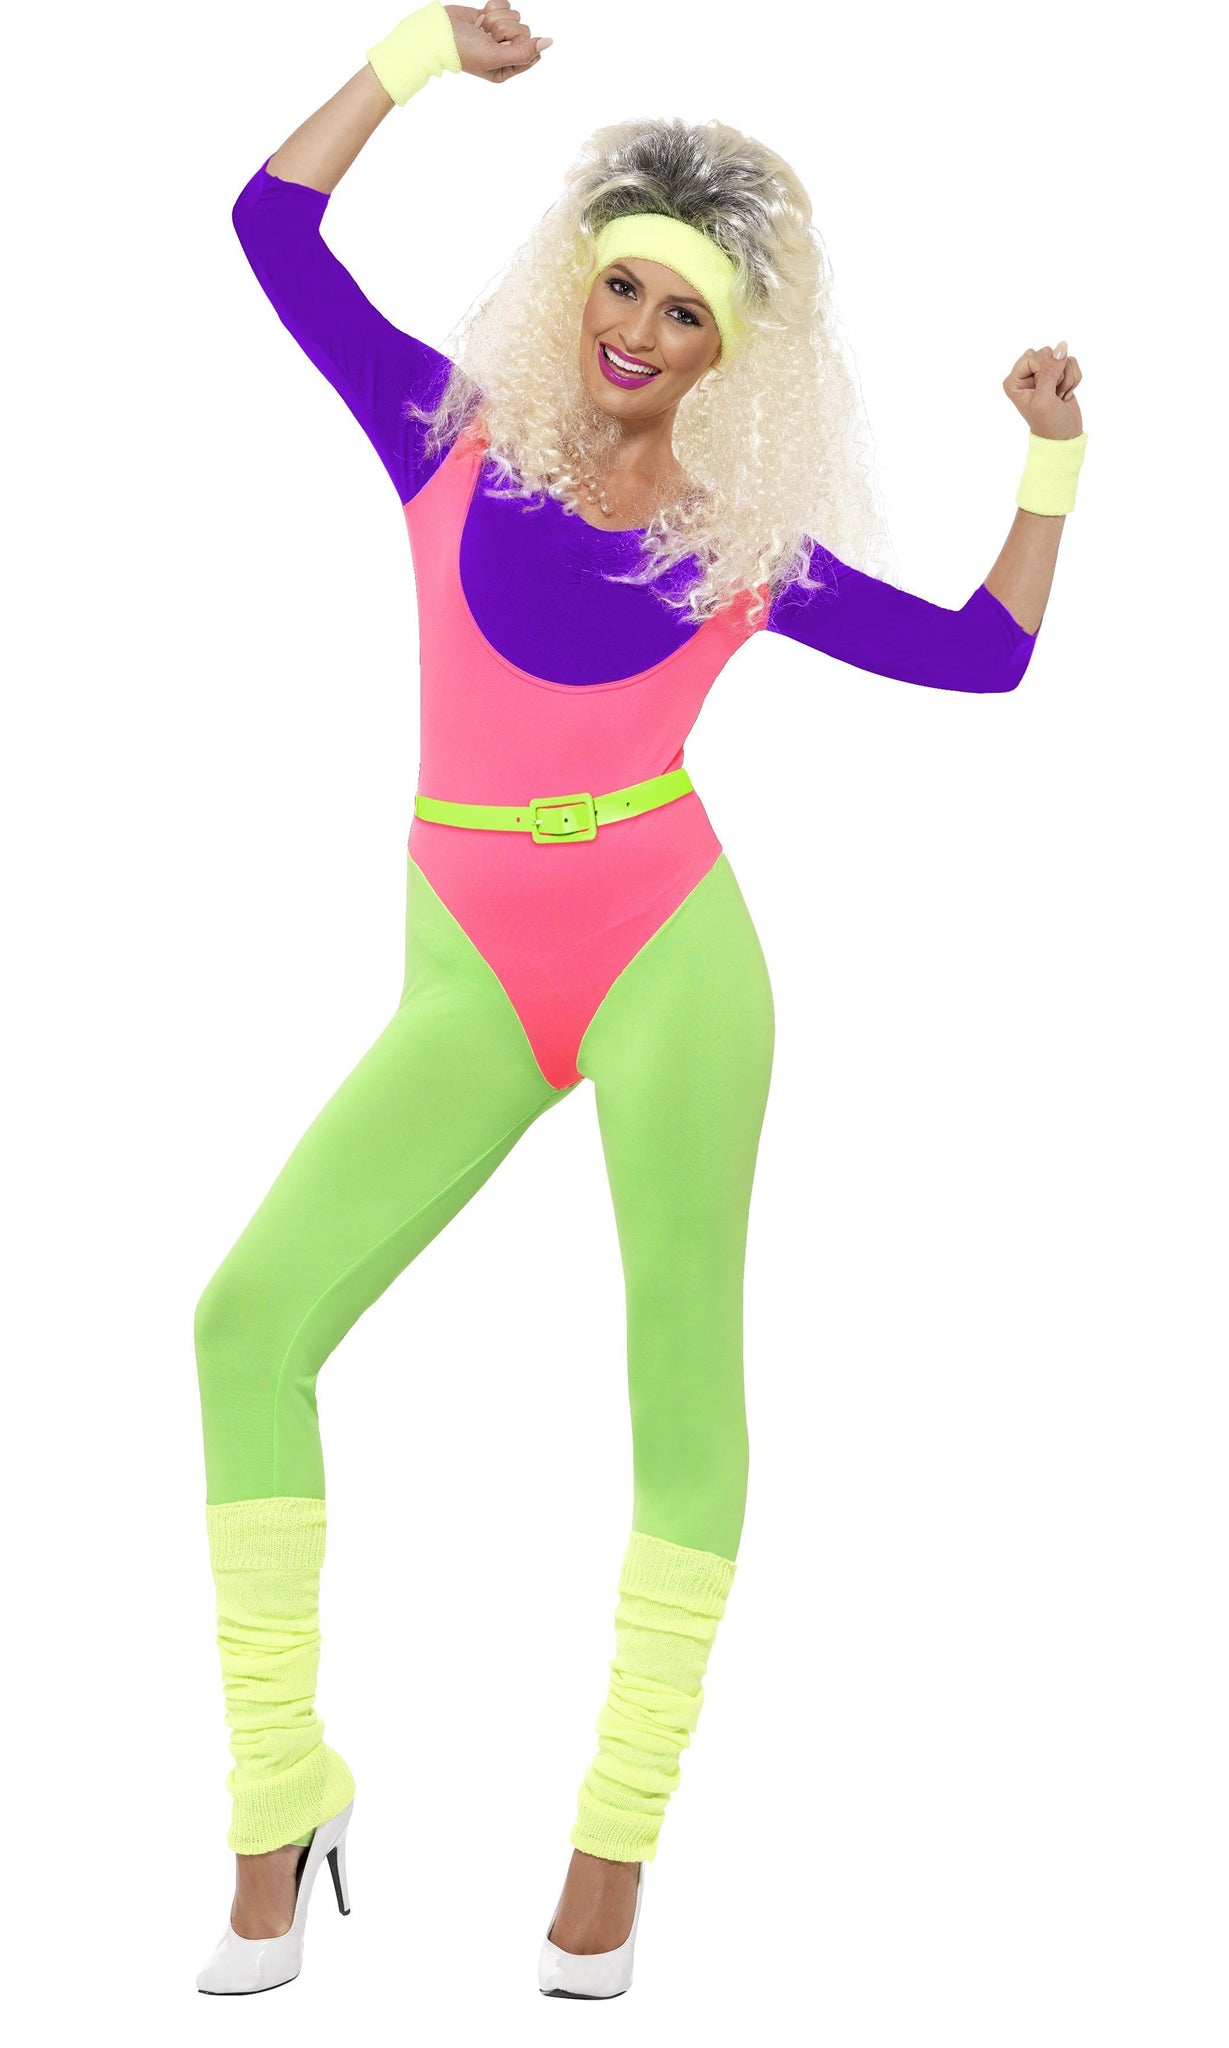 80s workout aerobics jumpsuit costume with headband, wristbands and legwarmers